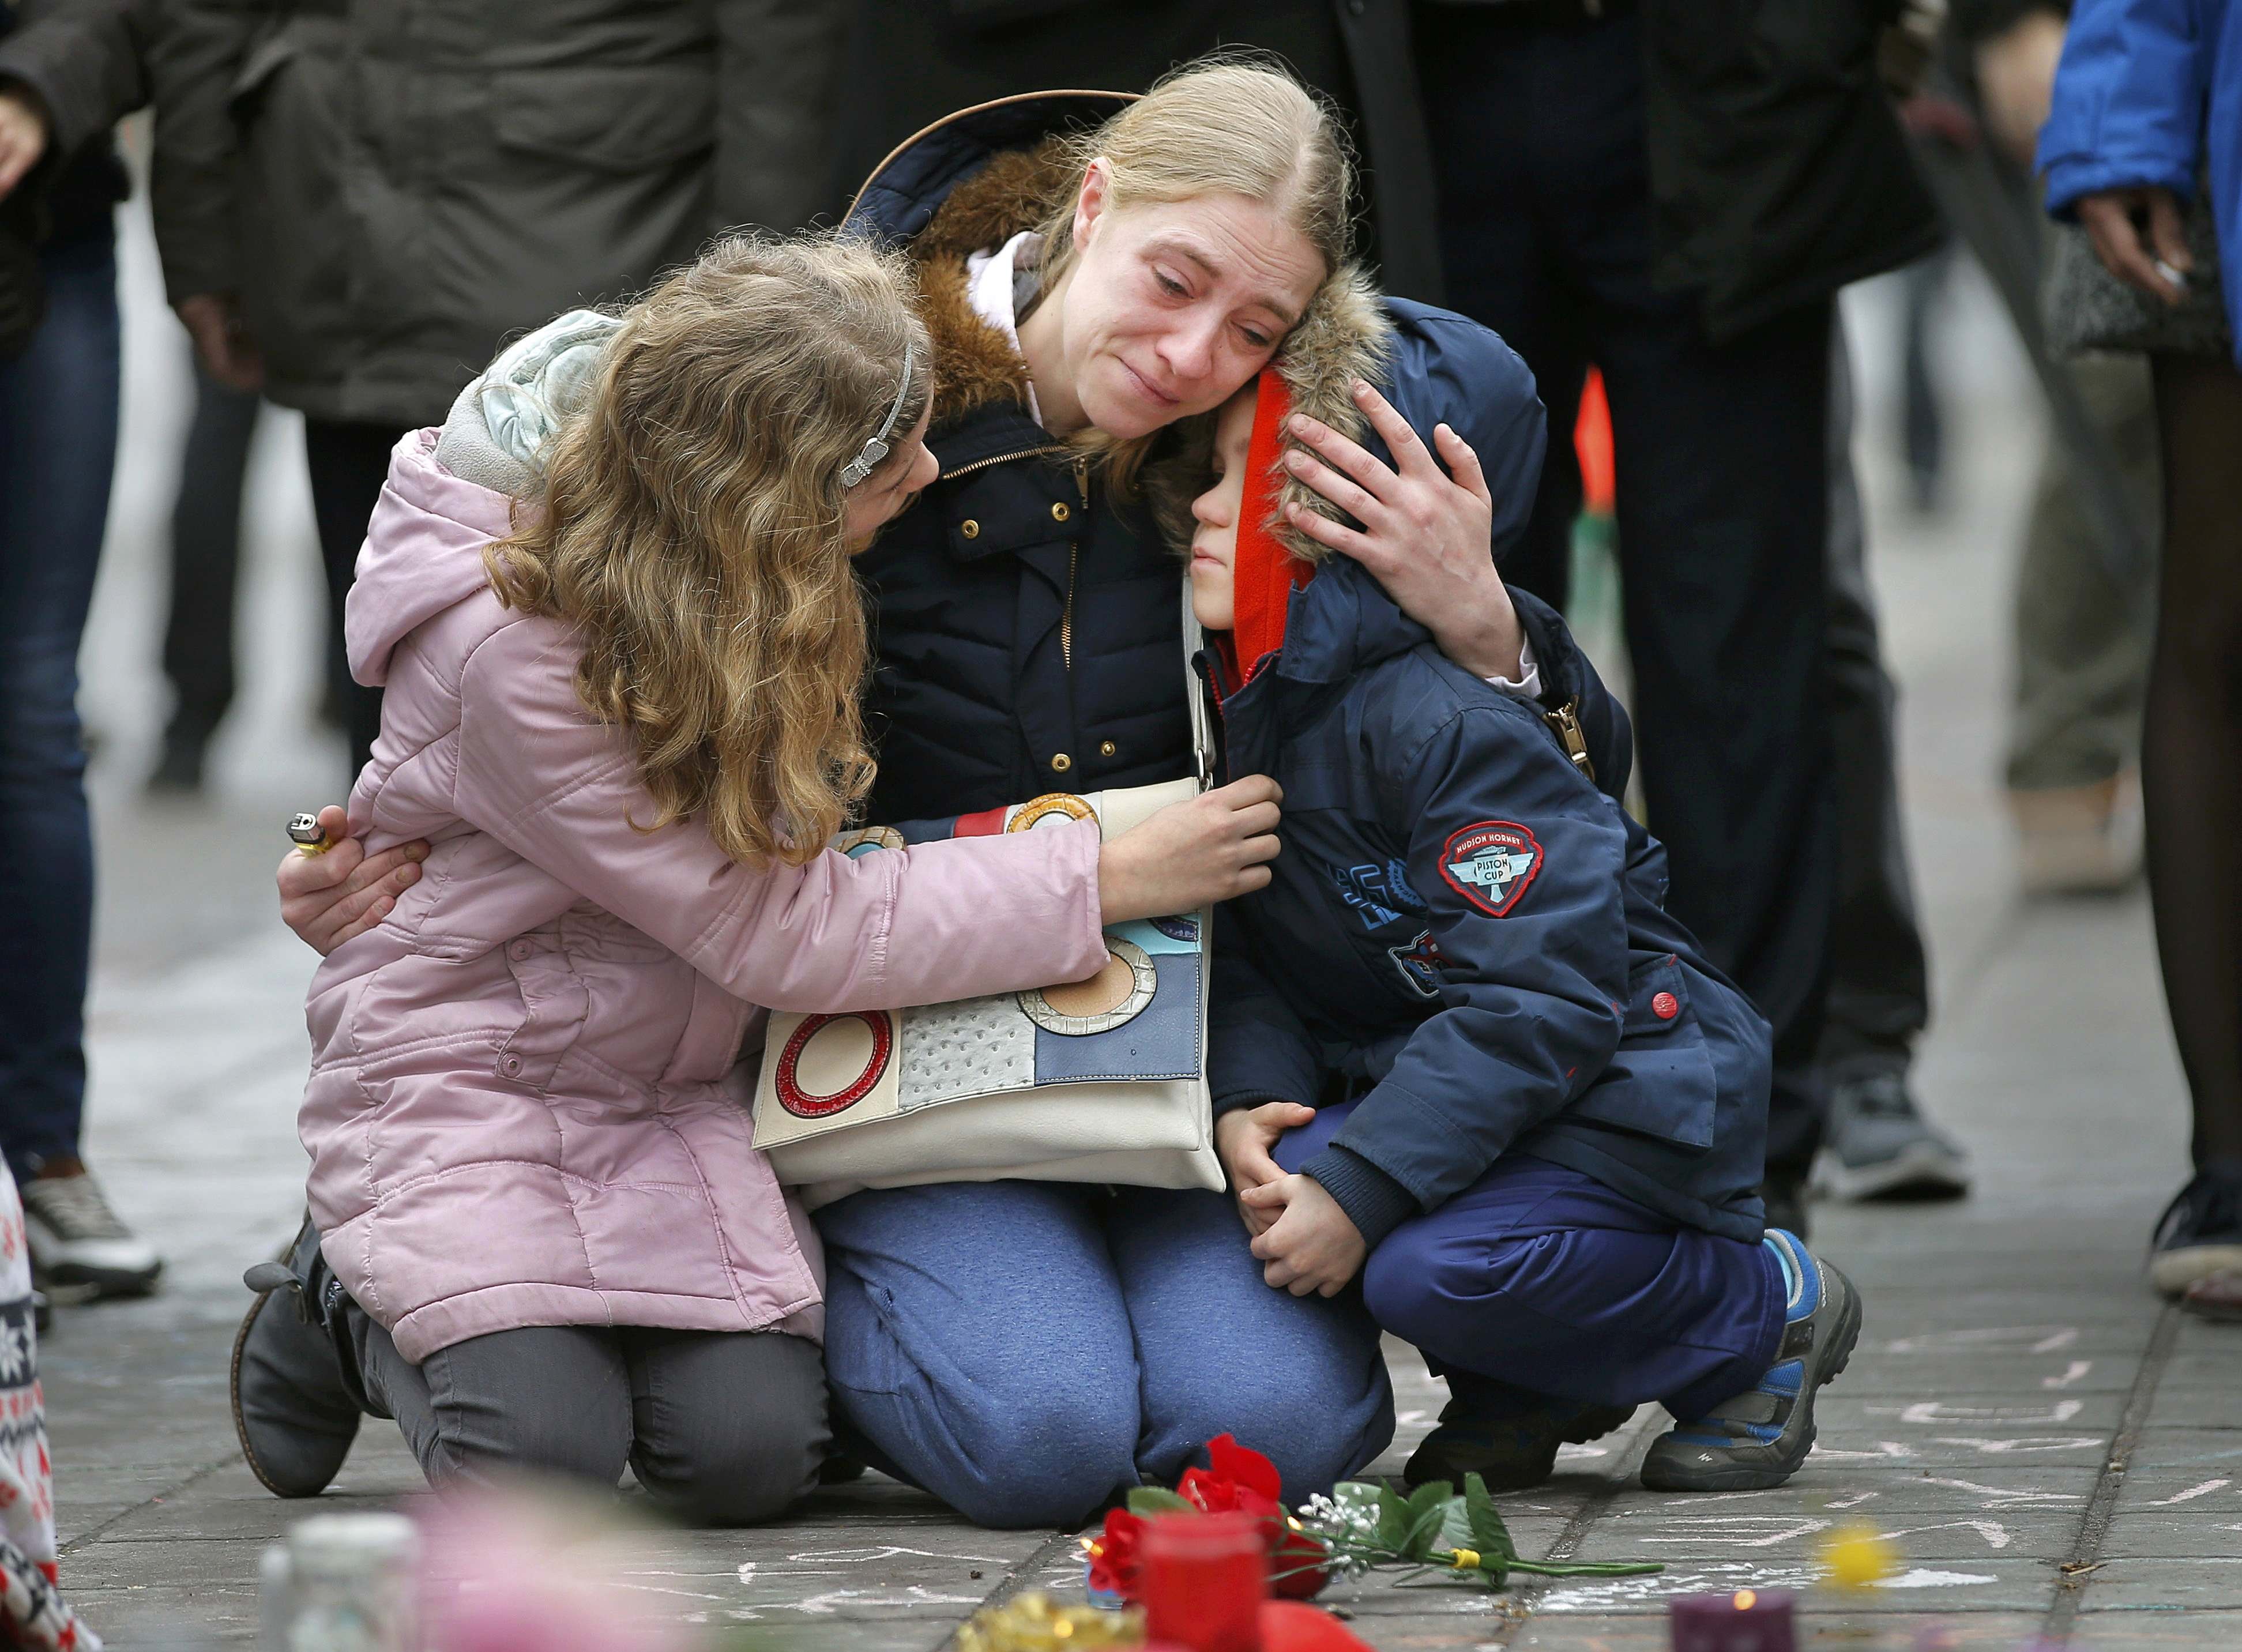 A woman consoles her children at a street memorial following Tuesday's bomb attacks in Brussels, on March 23, 2016. (Vincent Kessler—Reuters)